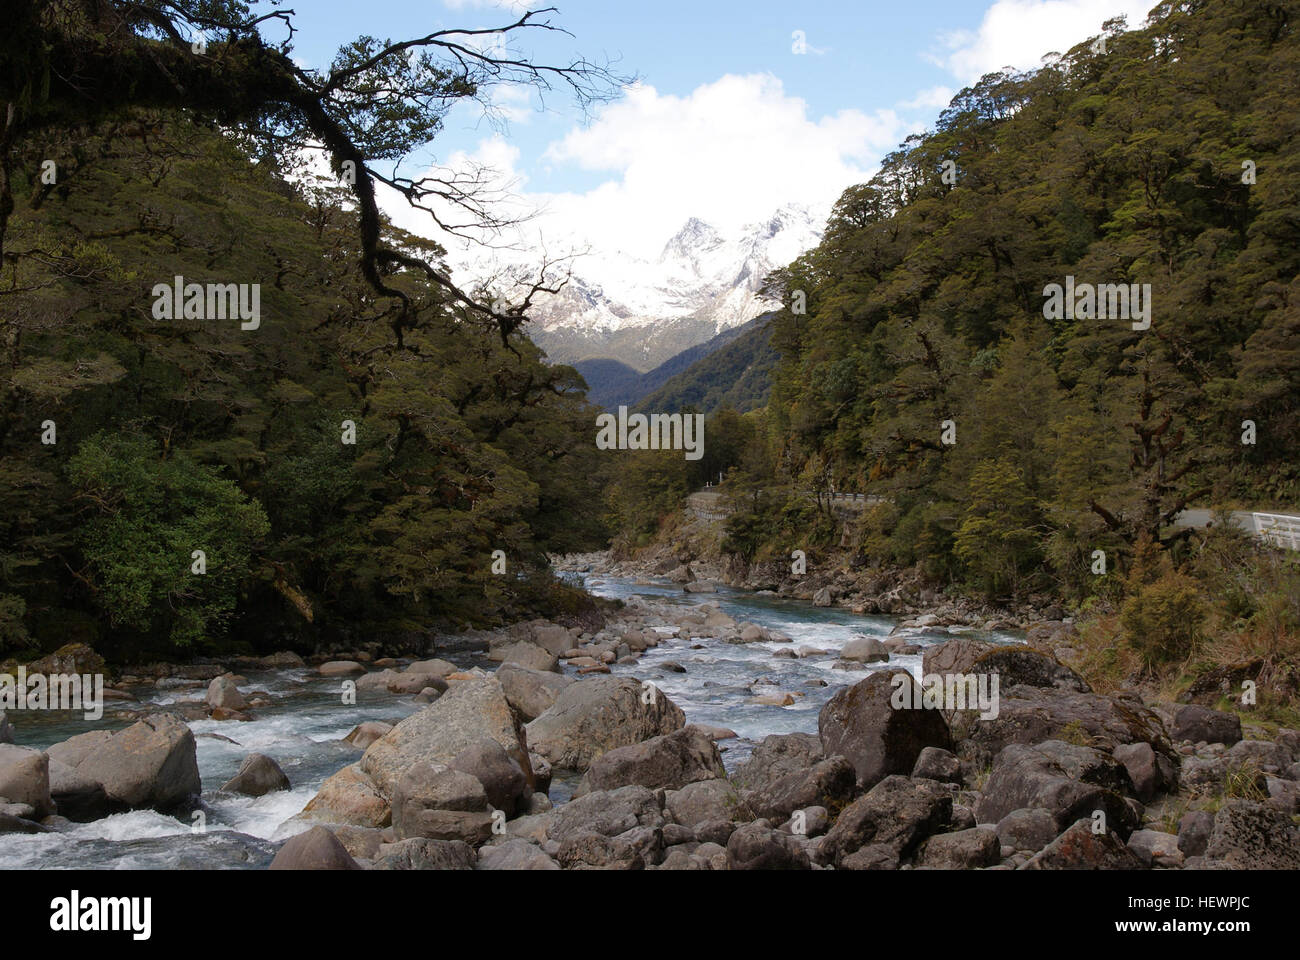 ication (,),Boat ride,Fiordland,Fiordland Nationial Park,FlickrElite,Grand Pacific Tours,High cliffs,Hollyford  River,Jucy Cruises,Lunch cruise,New Zealand,Real Journeys' 'Southern Discoveries,WATERFALLS,WILD LIFE,mountains,world heritage site Stock Photo